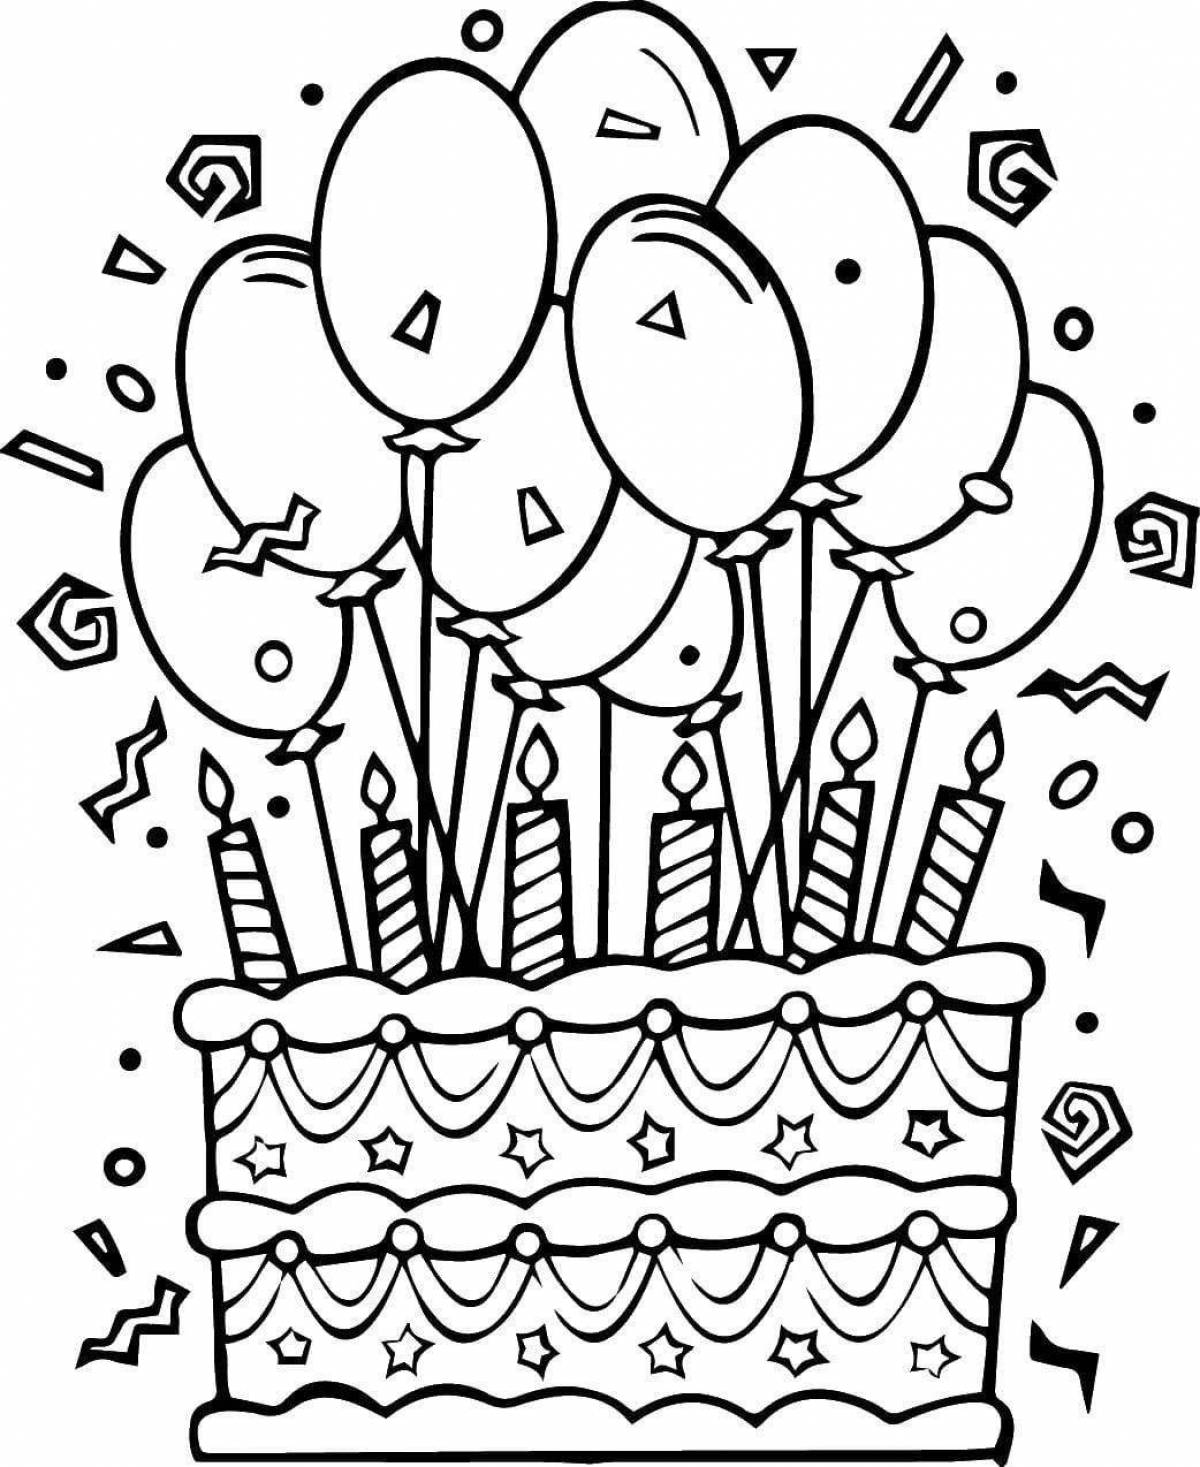 Celebration birthday coloring page